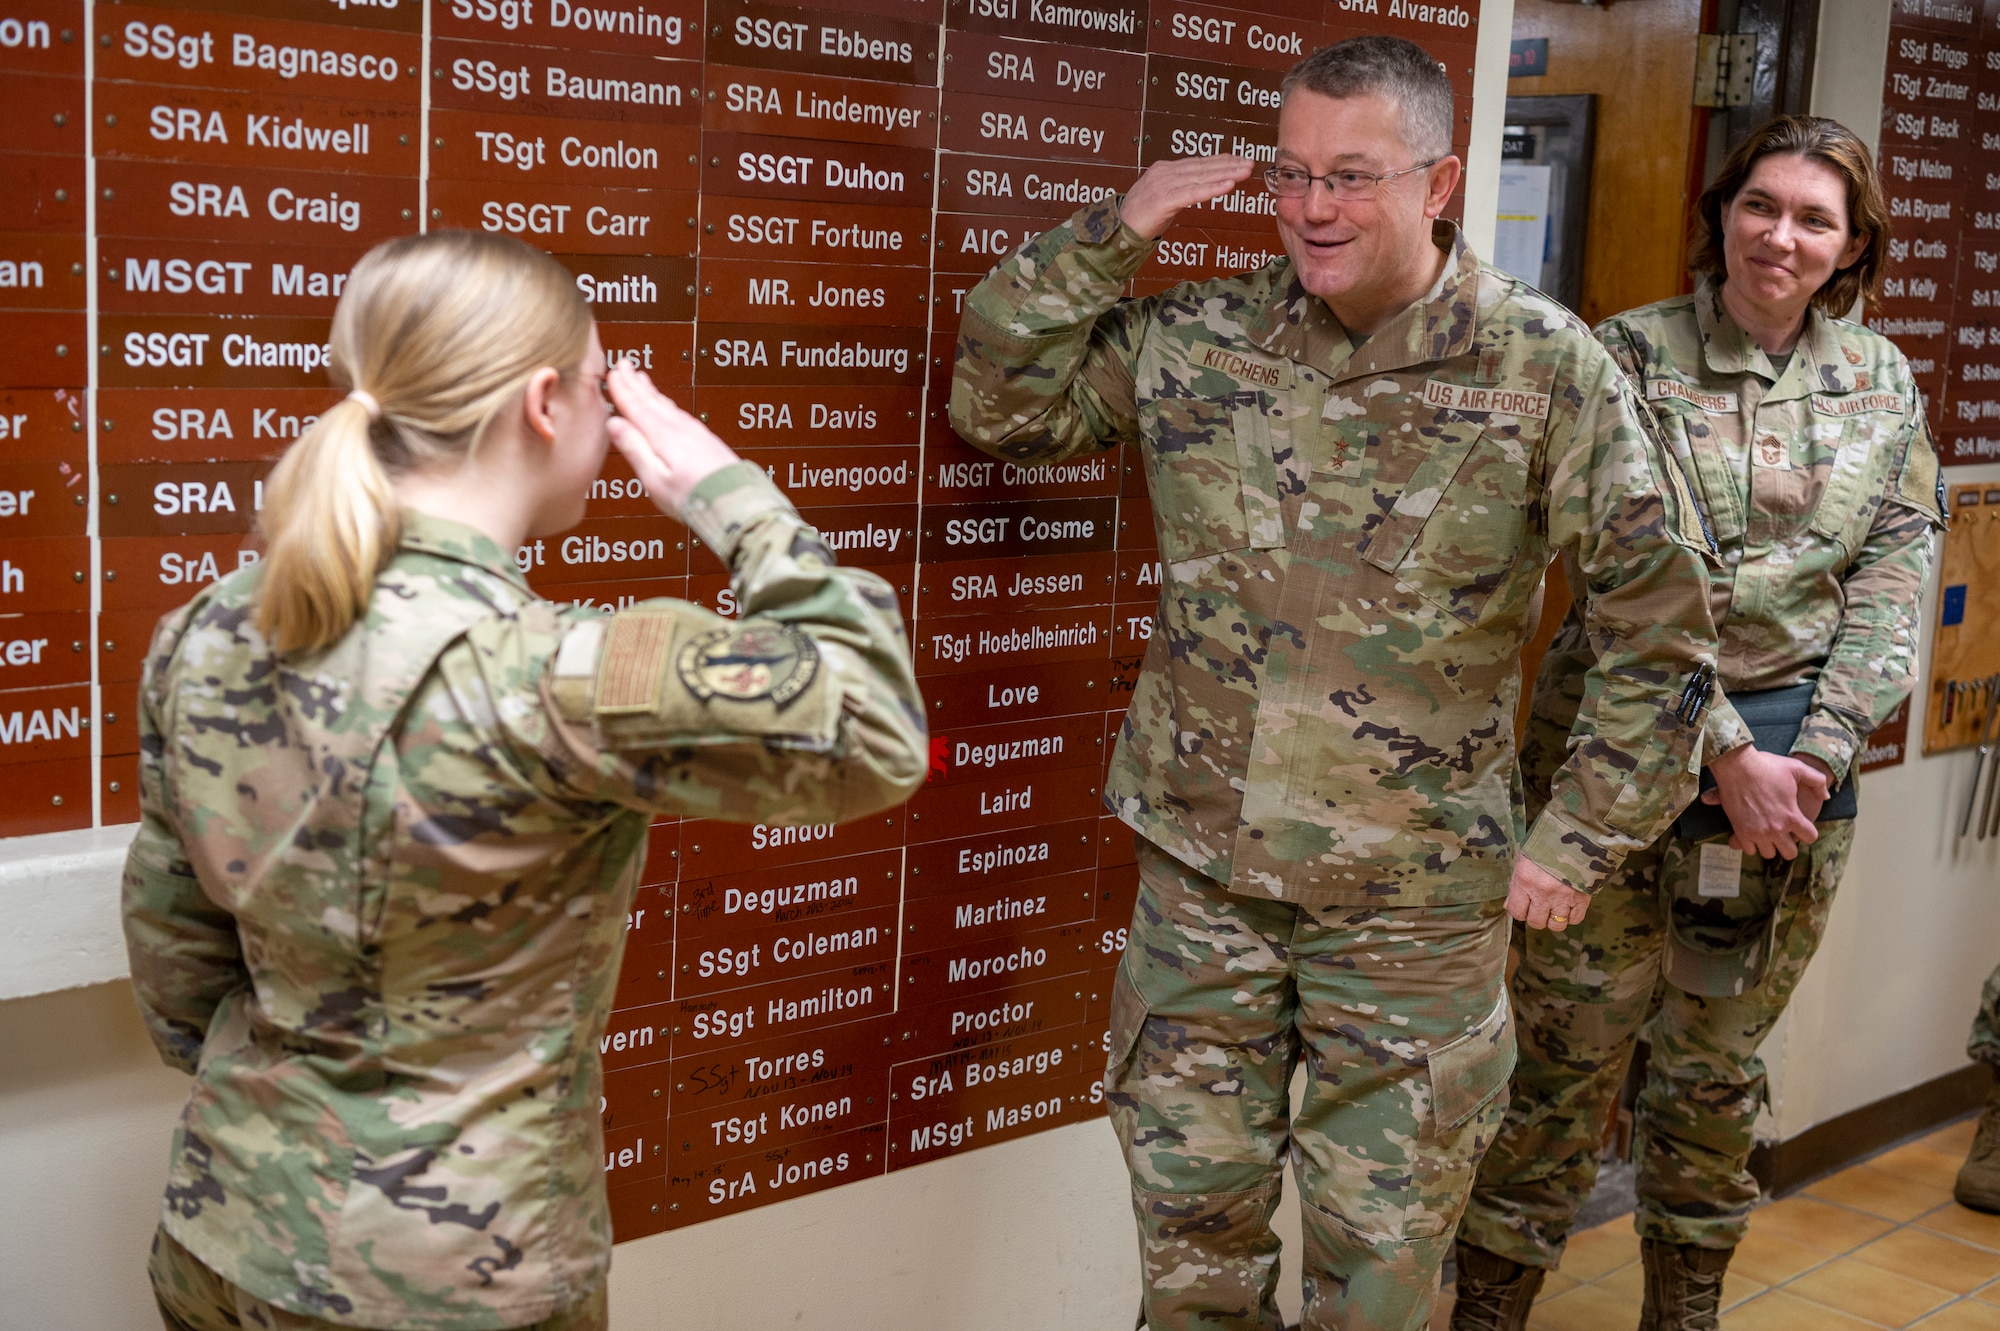 U.S. Air Force Maj. Gen. Randall Kitchens, U.S. Air Force Chief of Chaplains, salutes Senior Airman Julia Morgan, 51st Civil Engineer Squadron lock shop technician at Osan Air Base, Republic of Korea, Feb. 21, 2023. Morgan was coined for her exemplary performance as an Airman and a locksmith. Morgan is one of two General Services Administration-certified locksmiths on the Korean Peninsula. (U.S. Air Force photo by Airman 1st Class Aaron Edwards)